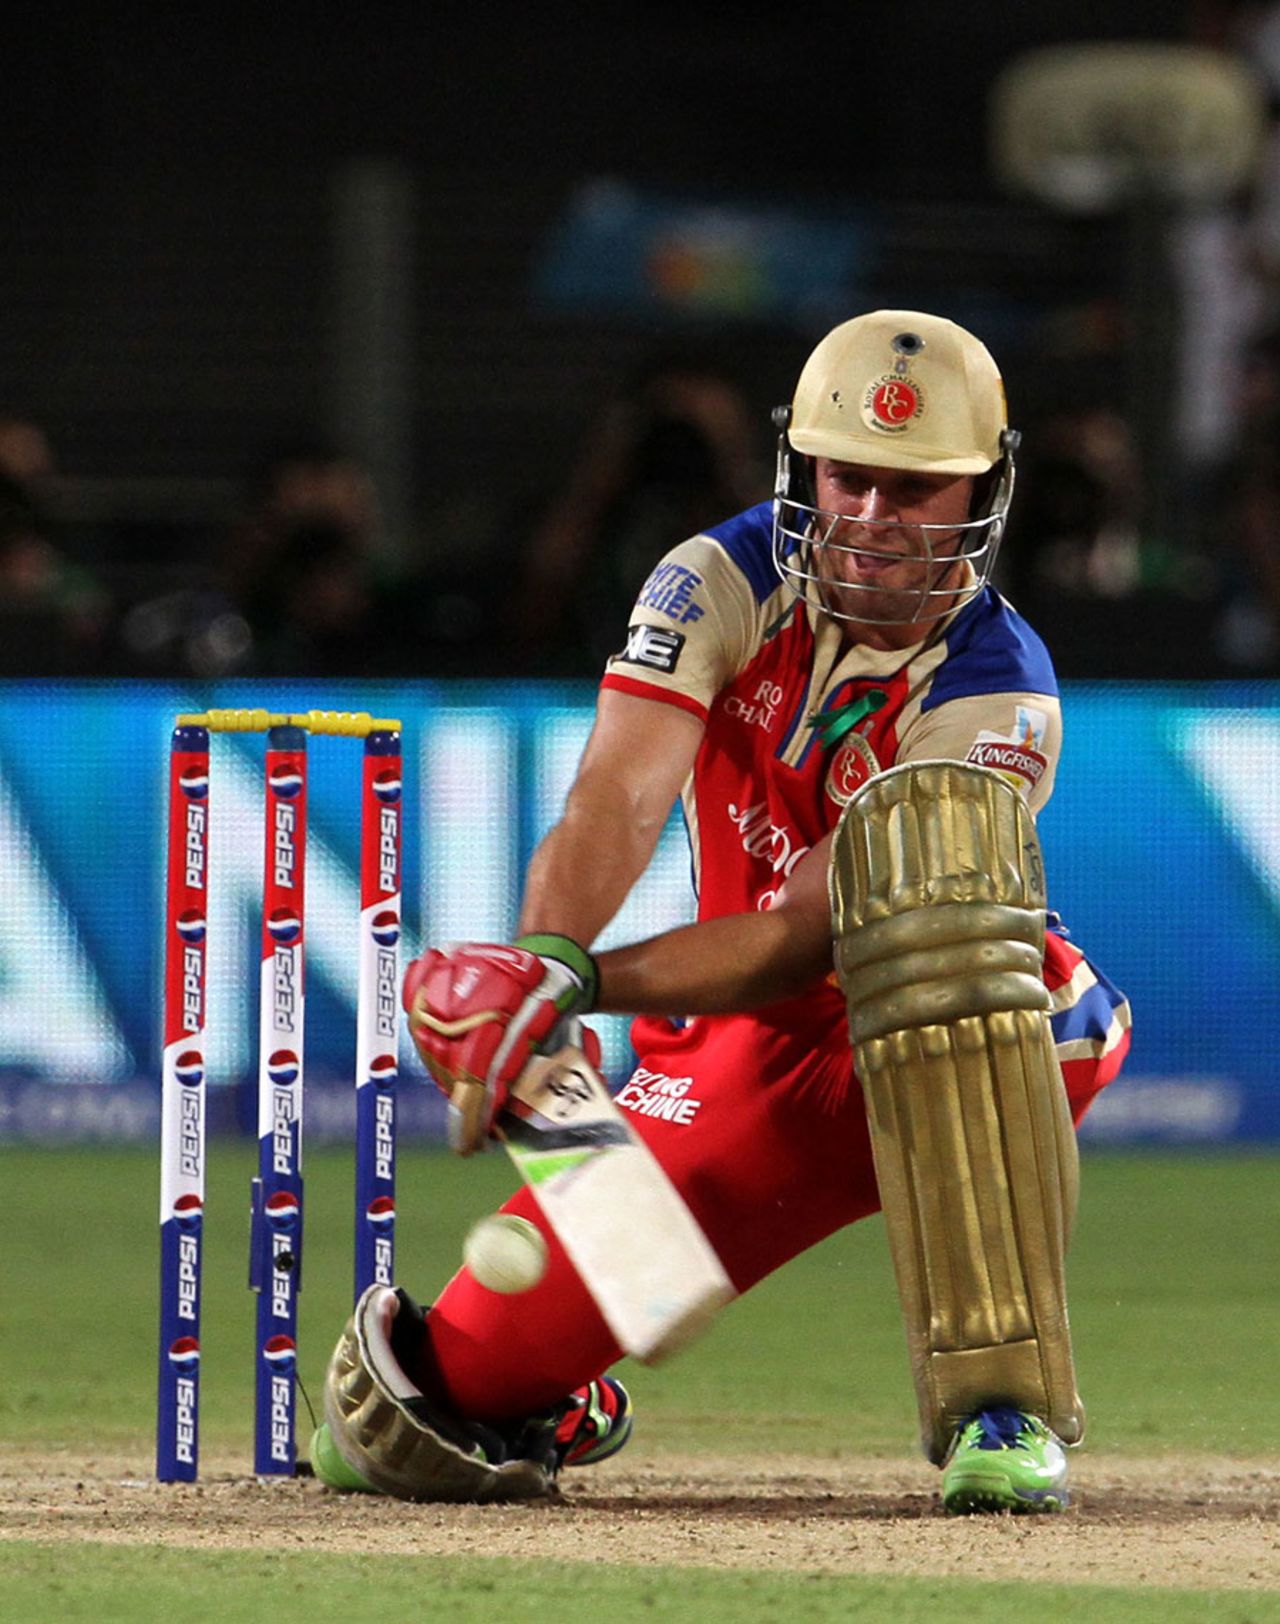 AB de Villiers knocked 26 off the Ashok Dinda's final over, Pune Warriors v Royal Challengers Bangalore, IPL 2013, Pune, May 2, 2013